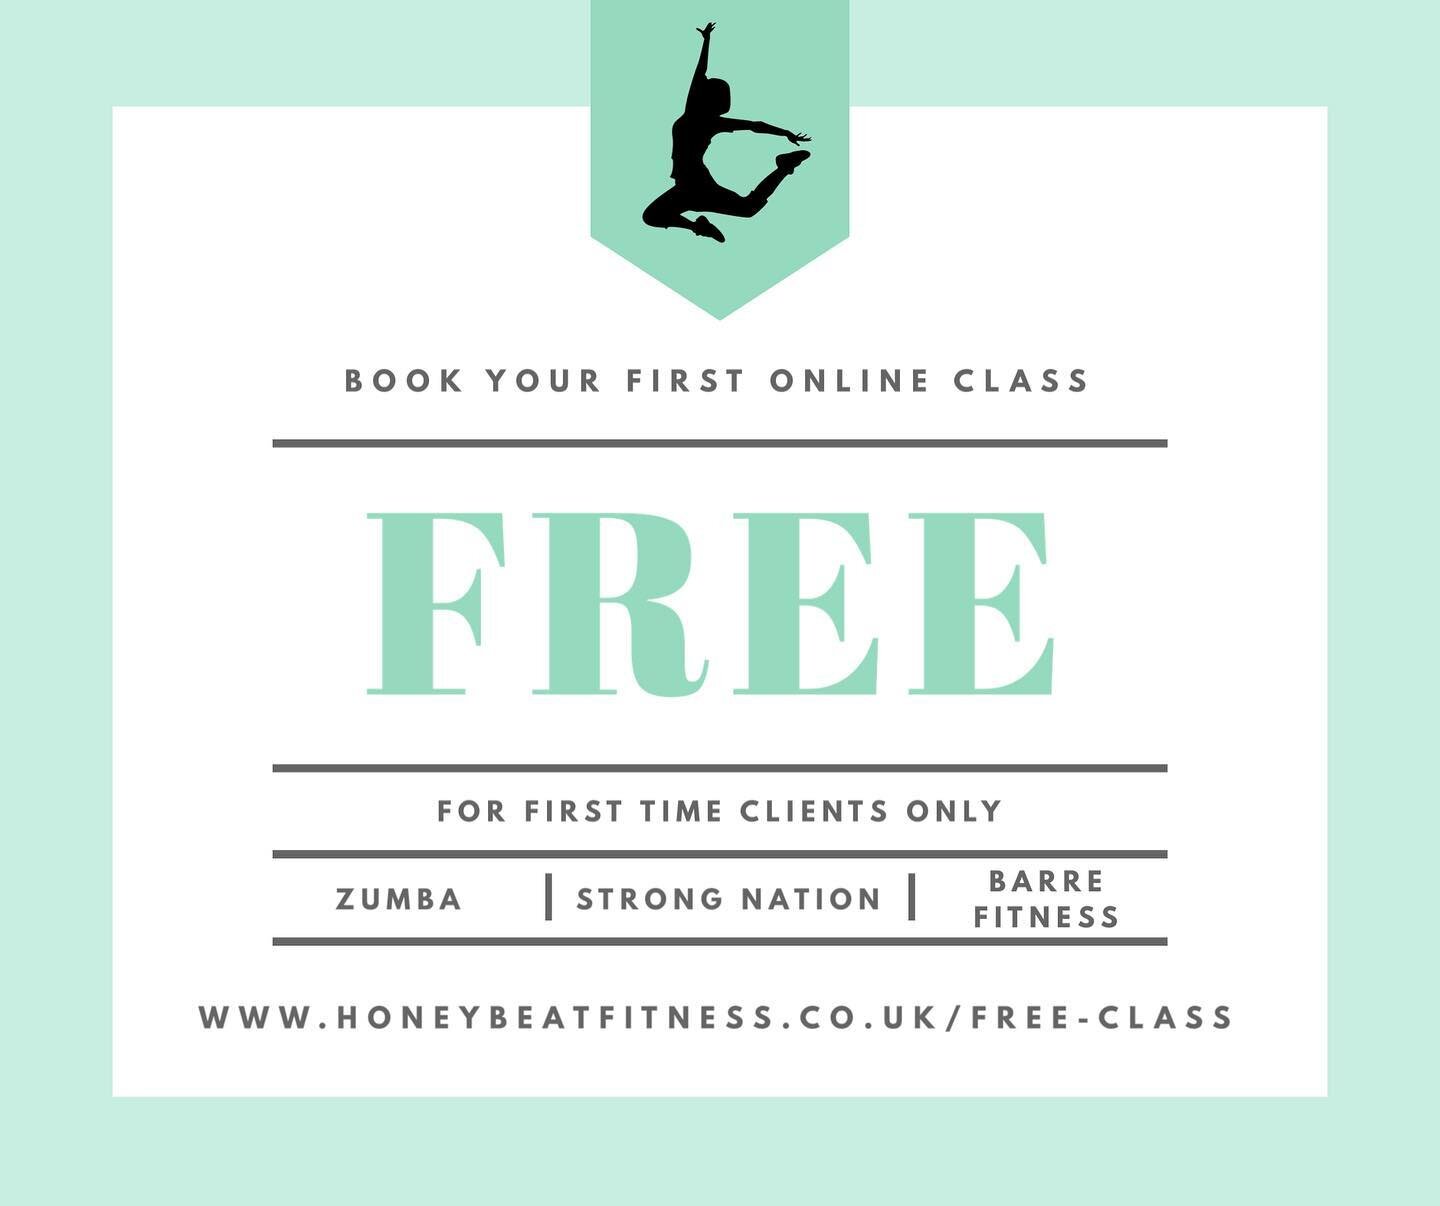 BOOK YOUR FREE CLASS TODAY! 

&bull; Do you want to try an online fitness class? 
&bull; Are you still unsure about going to face-to-face classes? 
&bull; Do you want to be able to work out from the comfort of your own home? 

If you answered yes to 